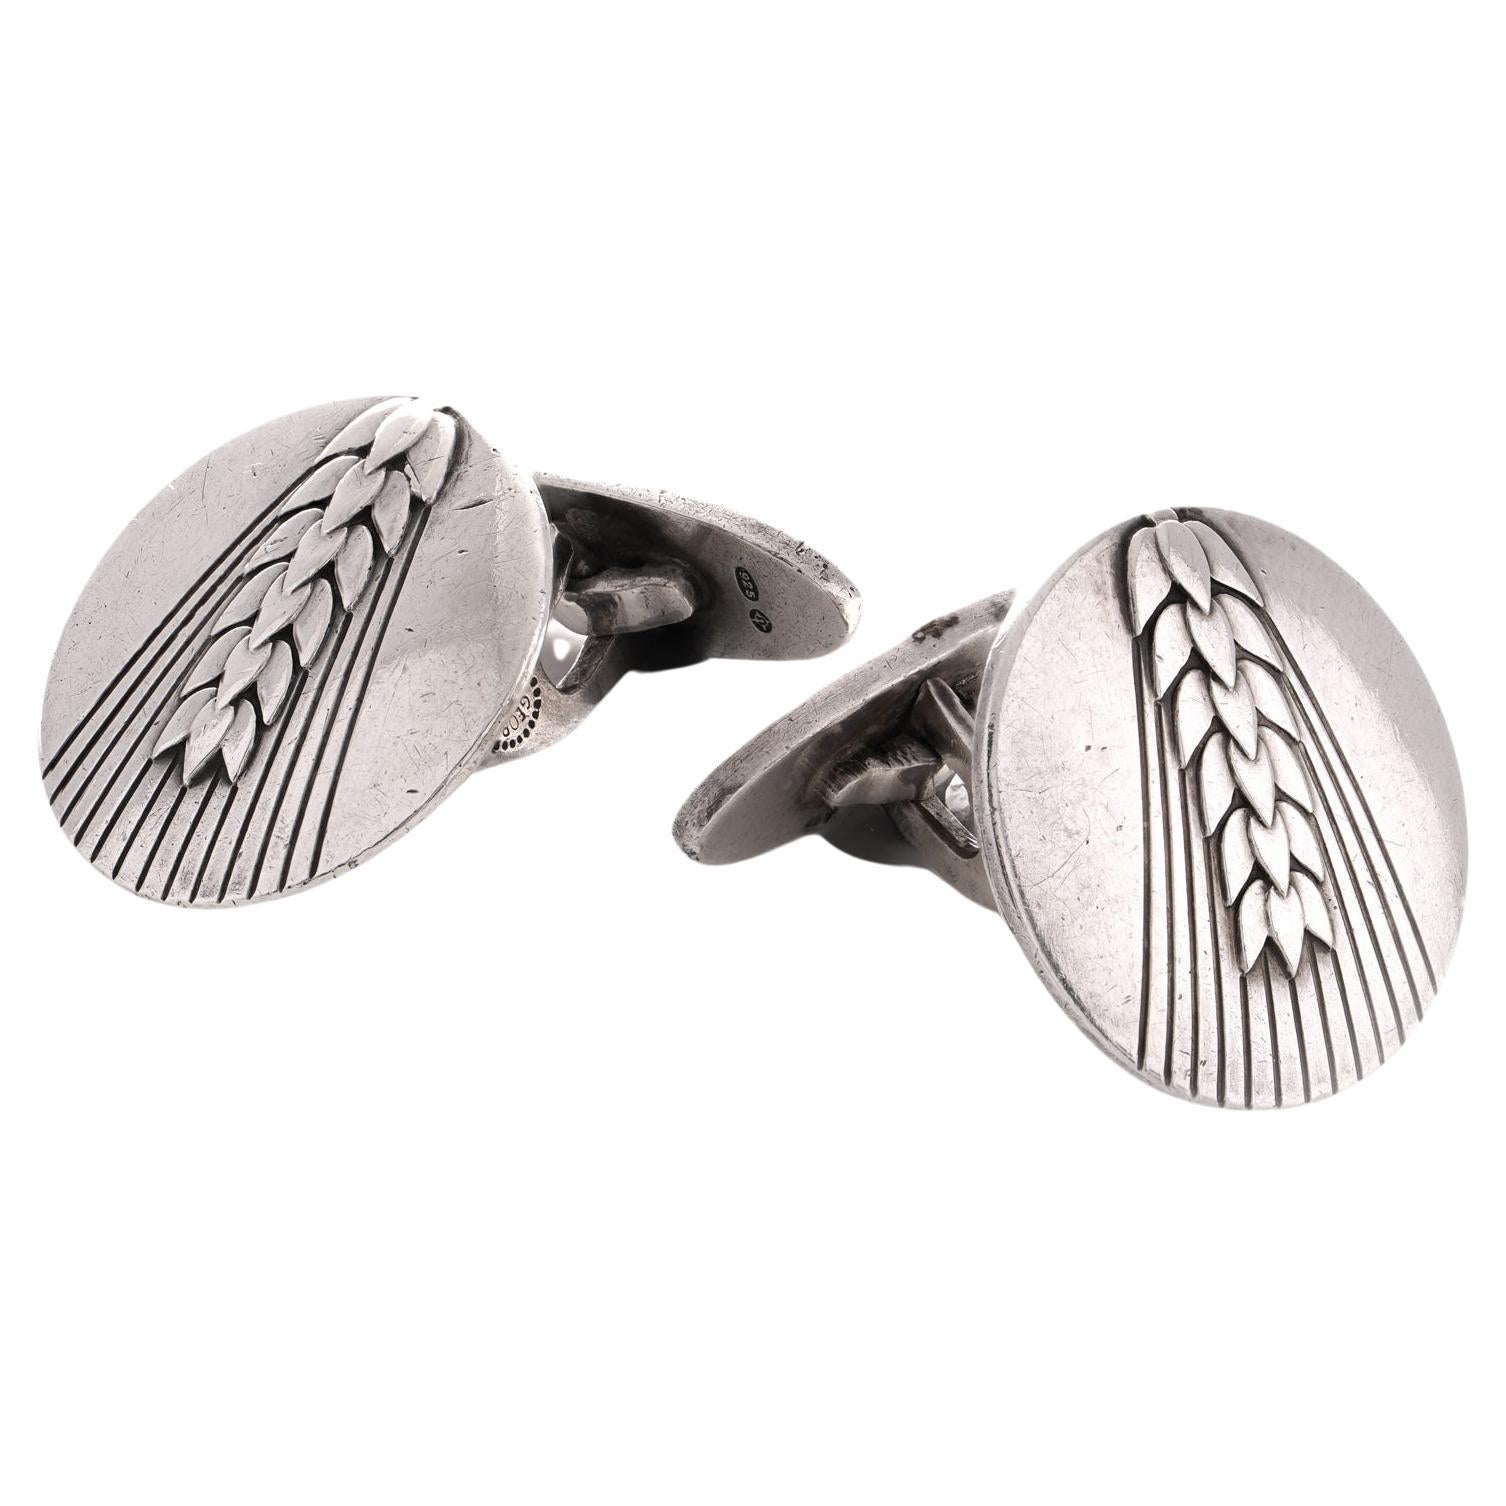 Georg Jensen sterling 925 silver pair of cufflinks, featuring a wheat design #78B
Created by Arno Malinowski for Georg Jensen
This particular design is no longer being manufactured.
Made in Denmark, Imported to United kingdom, 1955 
Hallmarked with